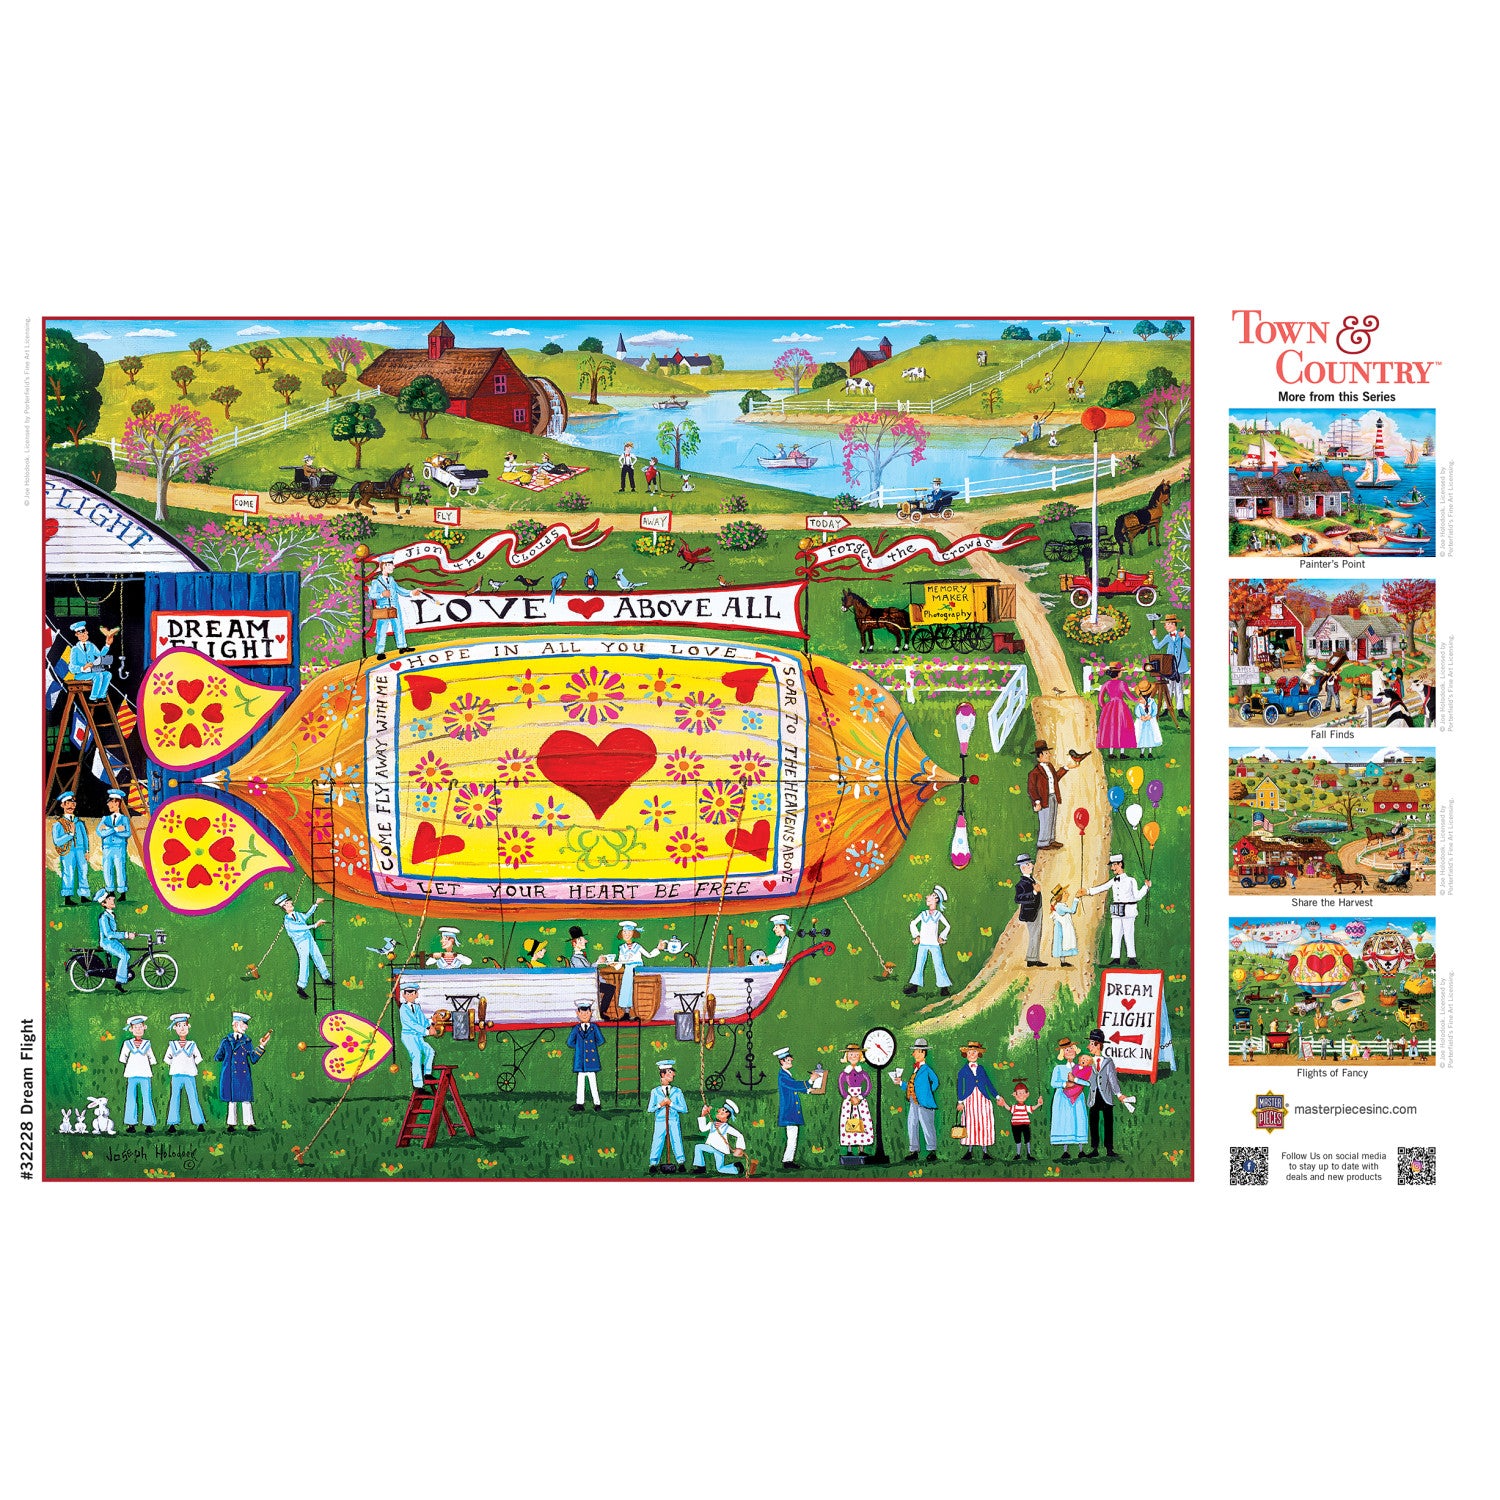 Town & Country - Dream Flight 300 Piece Puzzle